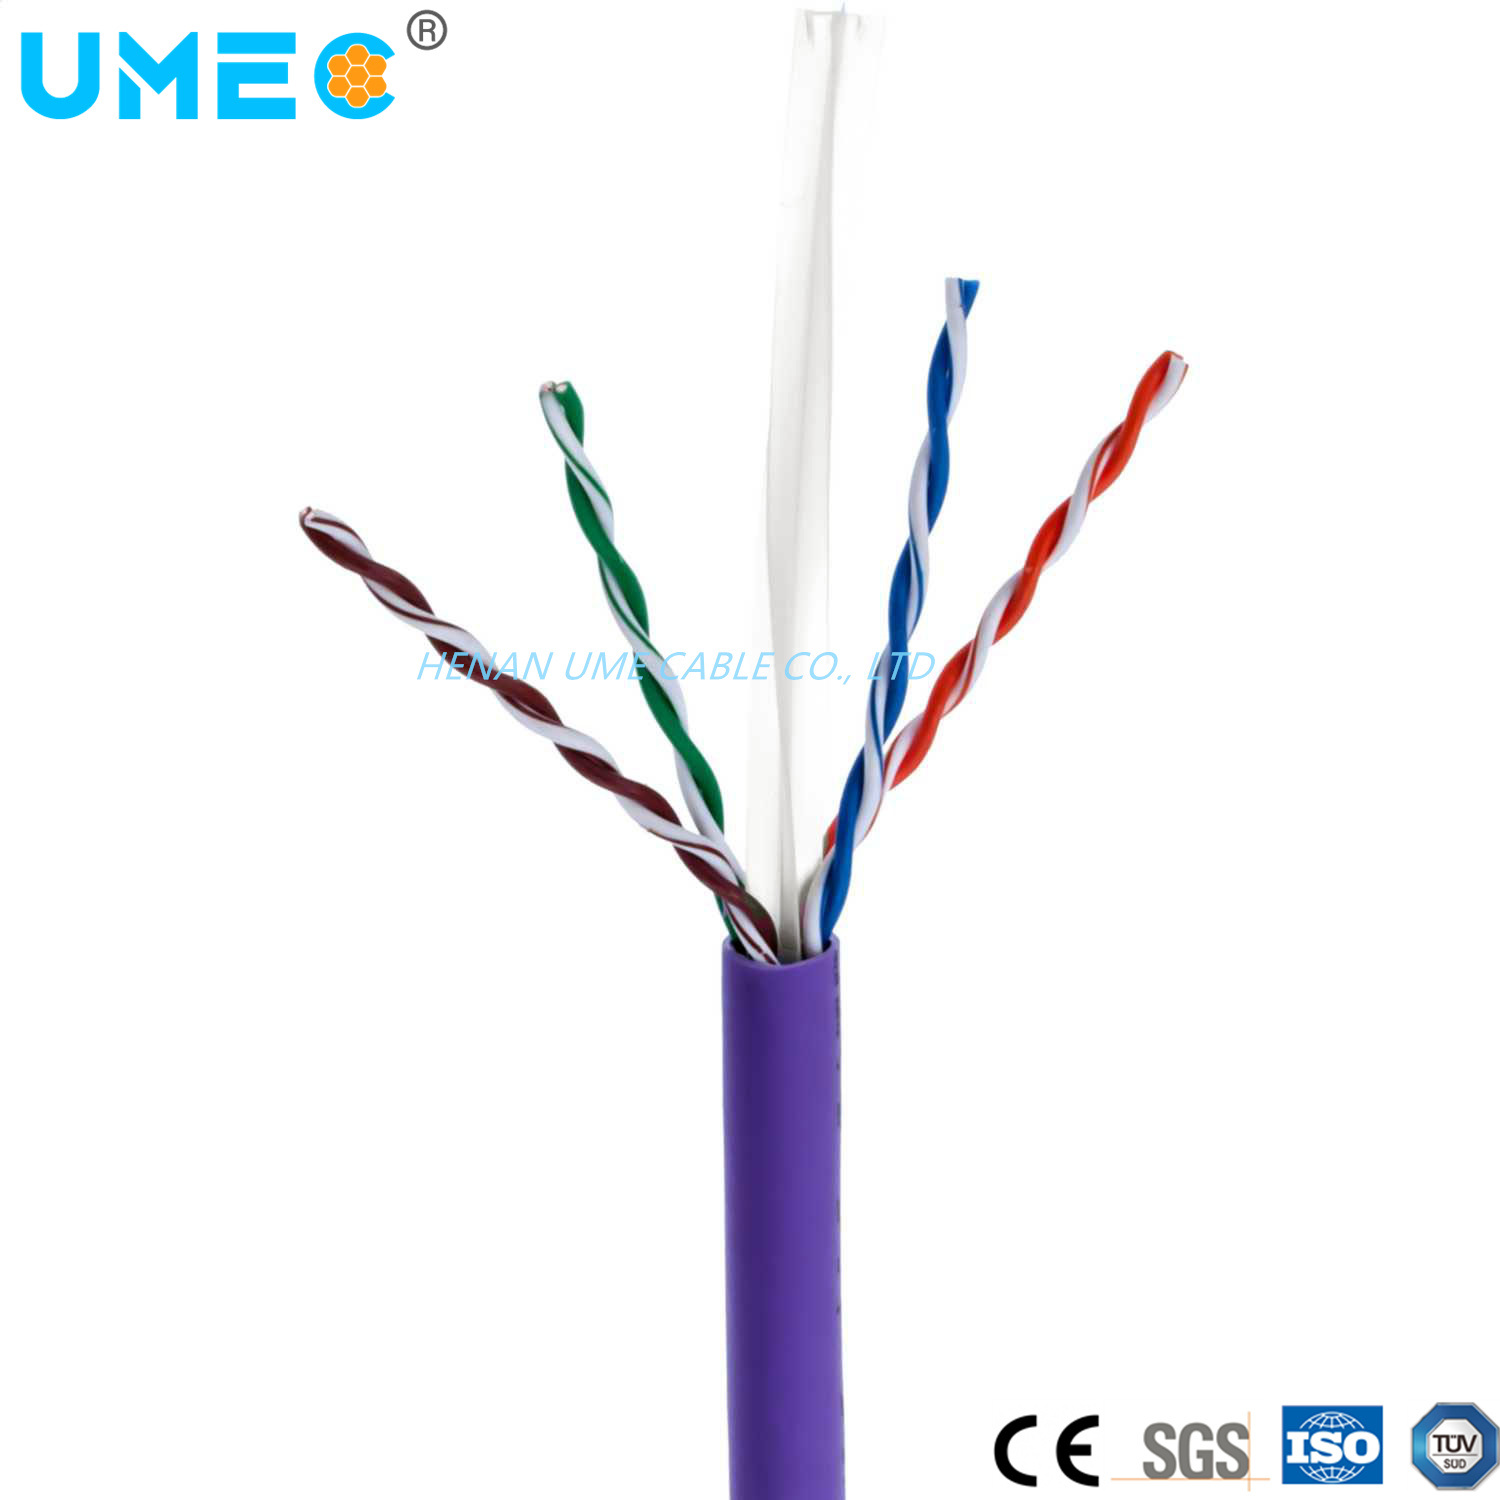 Factory Price 305m Cat5 Cat5e CAT6 Cat6e CAT6A Cat7 UTP FTP SFTP Ethernet Network Cable Patch LAN Cable 23AWG 24AWG 25AWG